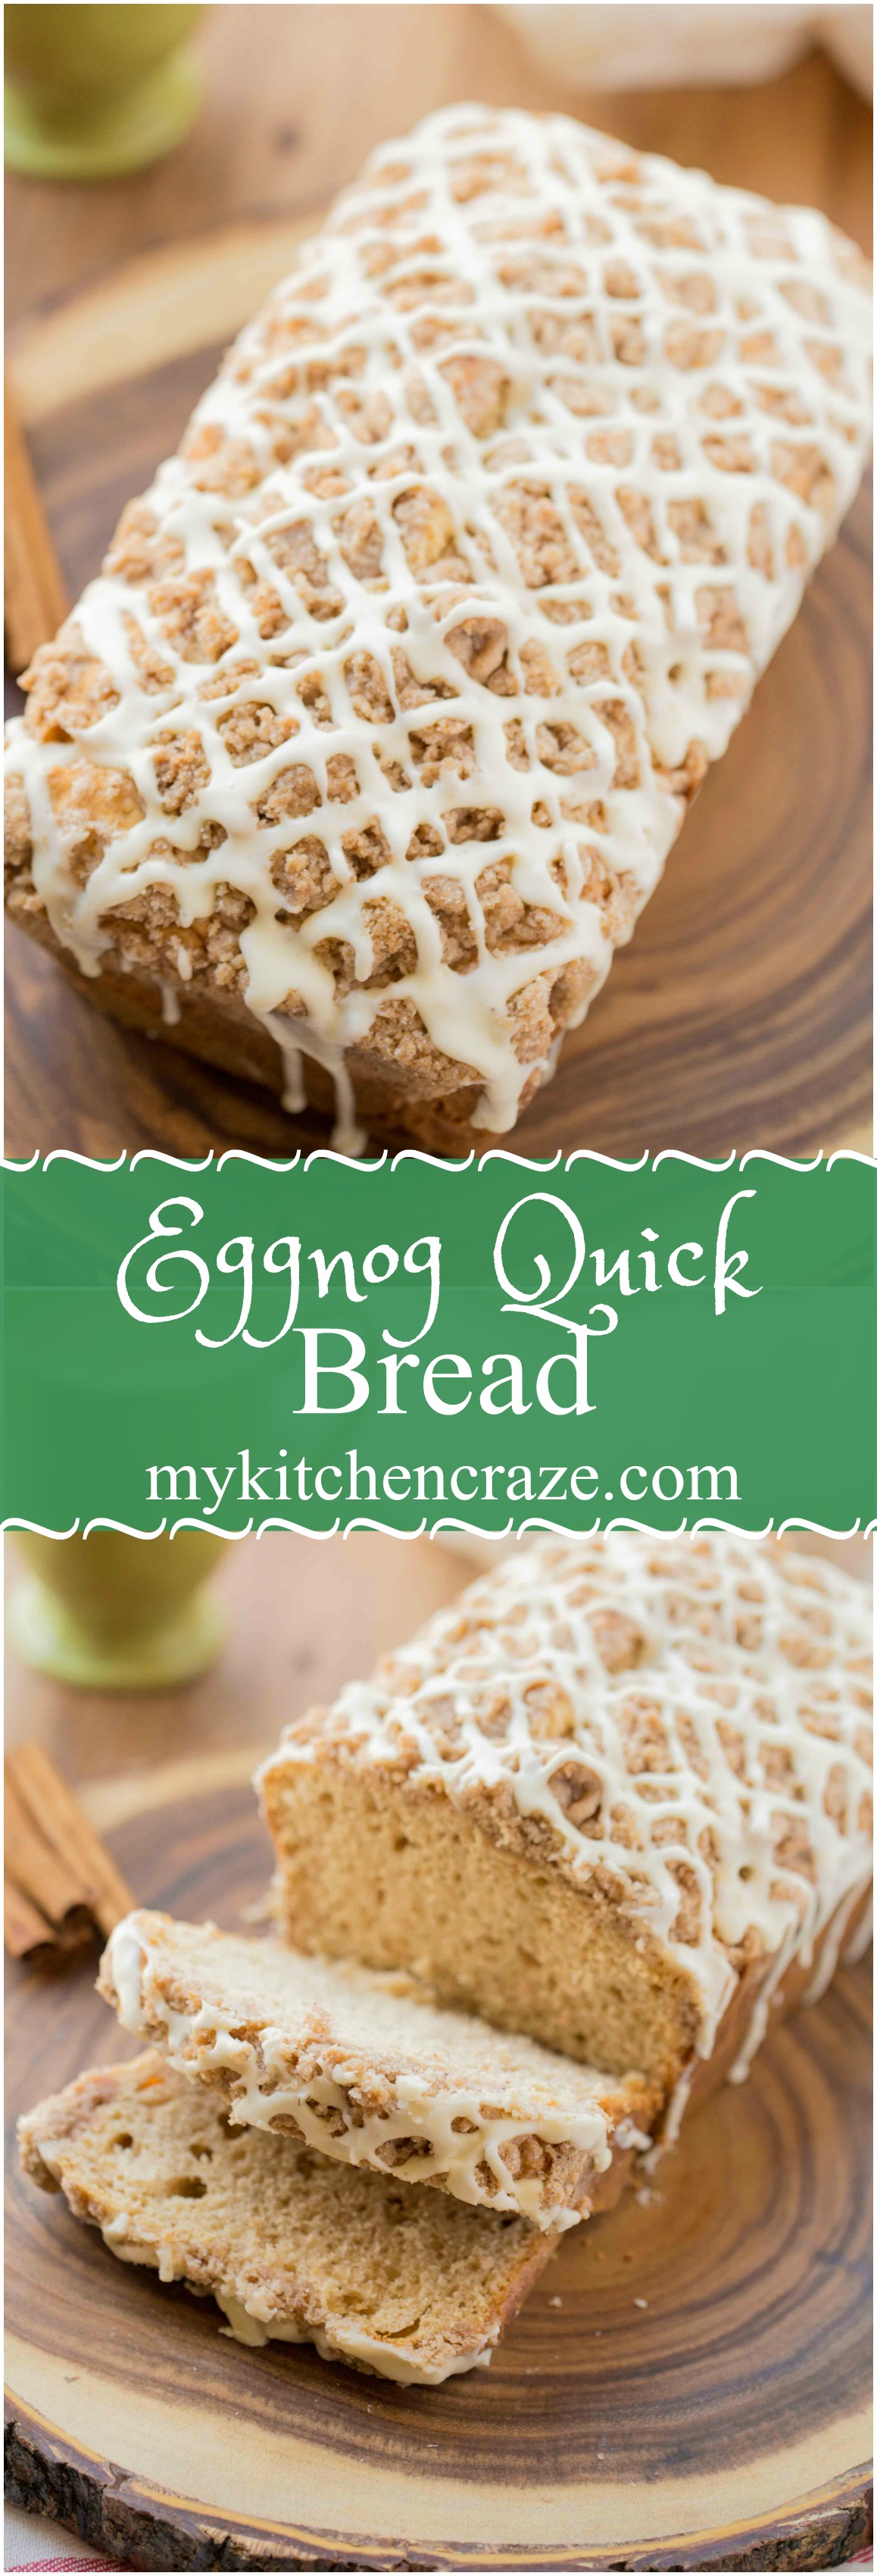 Eggnog Quick Bread should be on your holiday baking list this year! Moist and flavorful, this bread is a winner this season! 